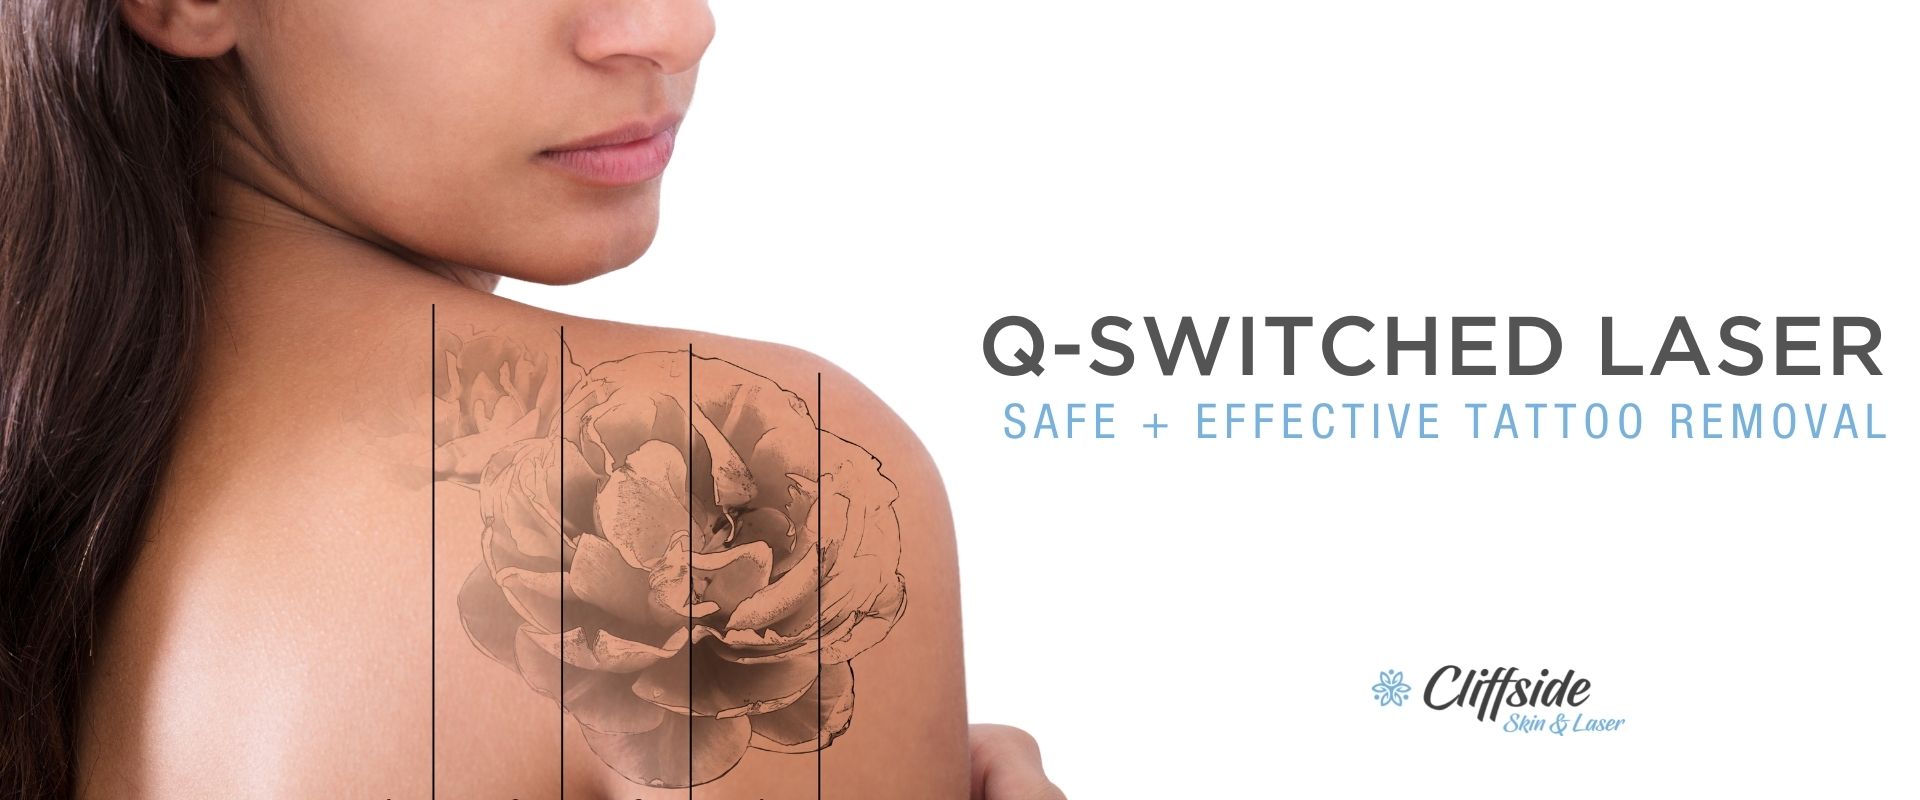 Laser tattoo removal on woman's shoulder with Q-Switched